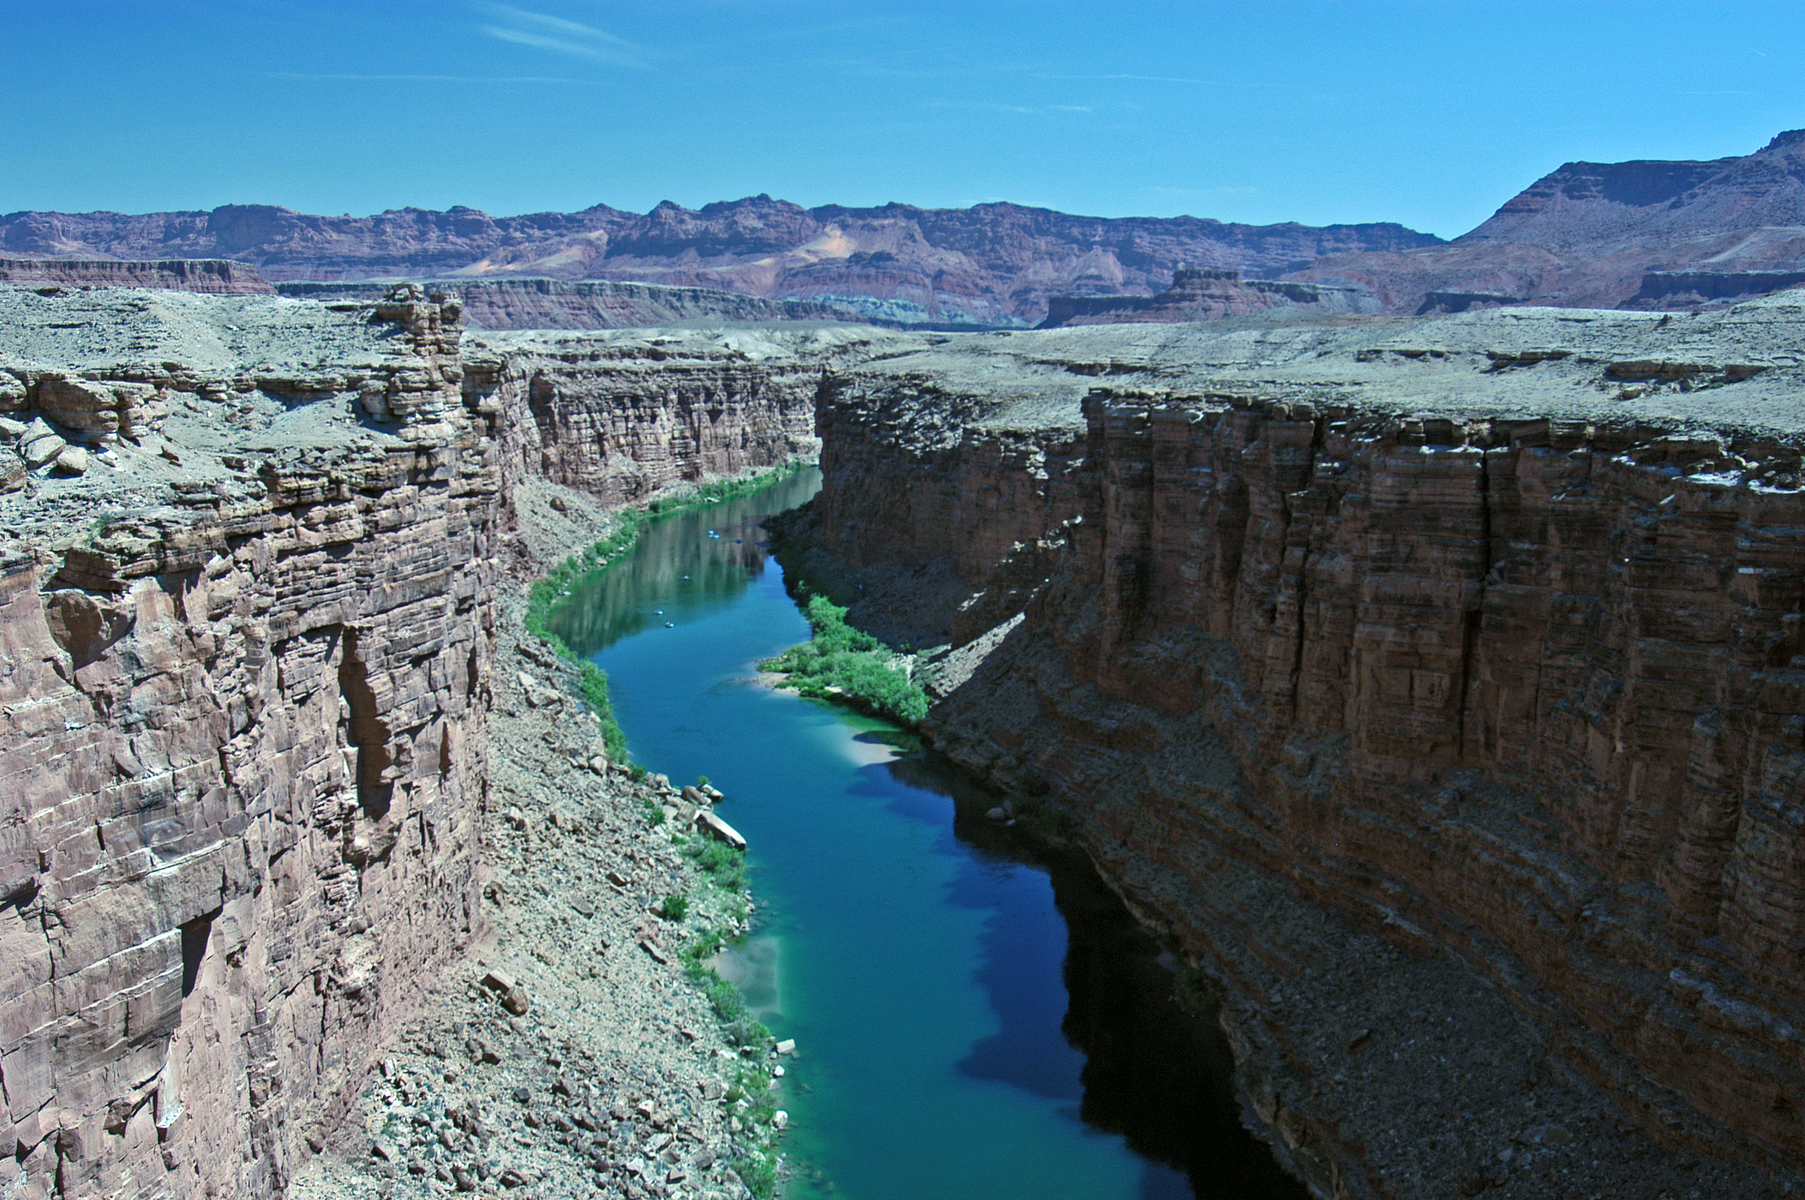 the stretch of the Colorado River below Glen Canyon Dam leading into the Grand Canyon